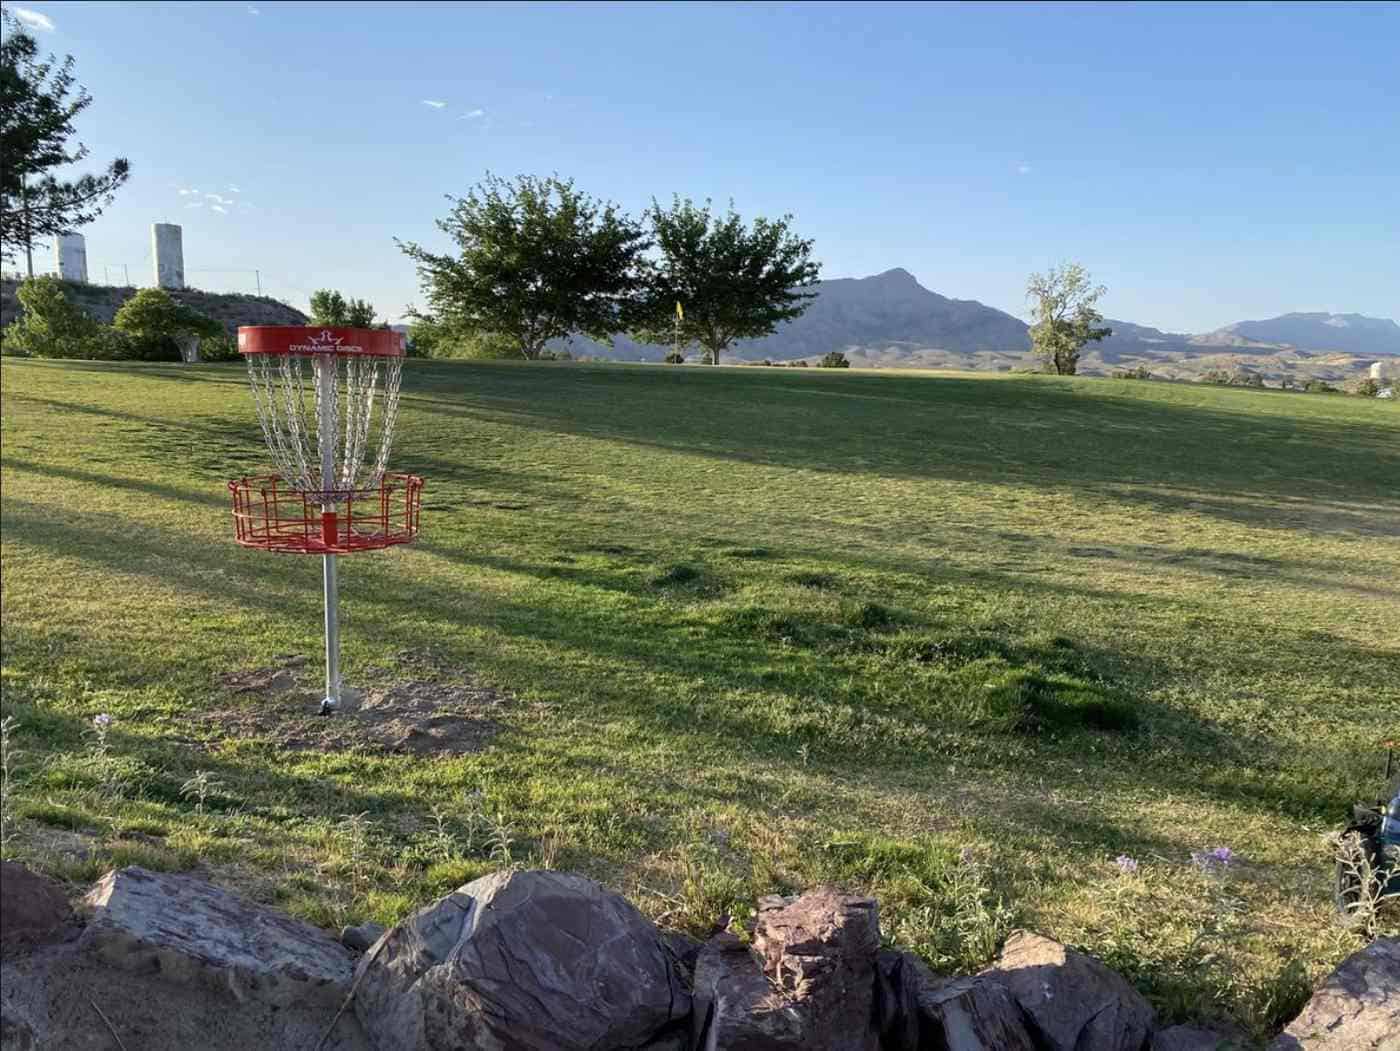 disc golf truth or consequences municipal